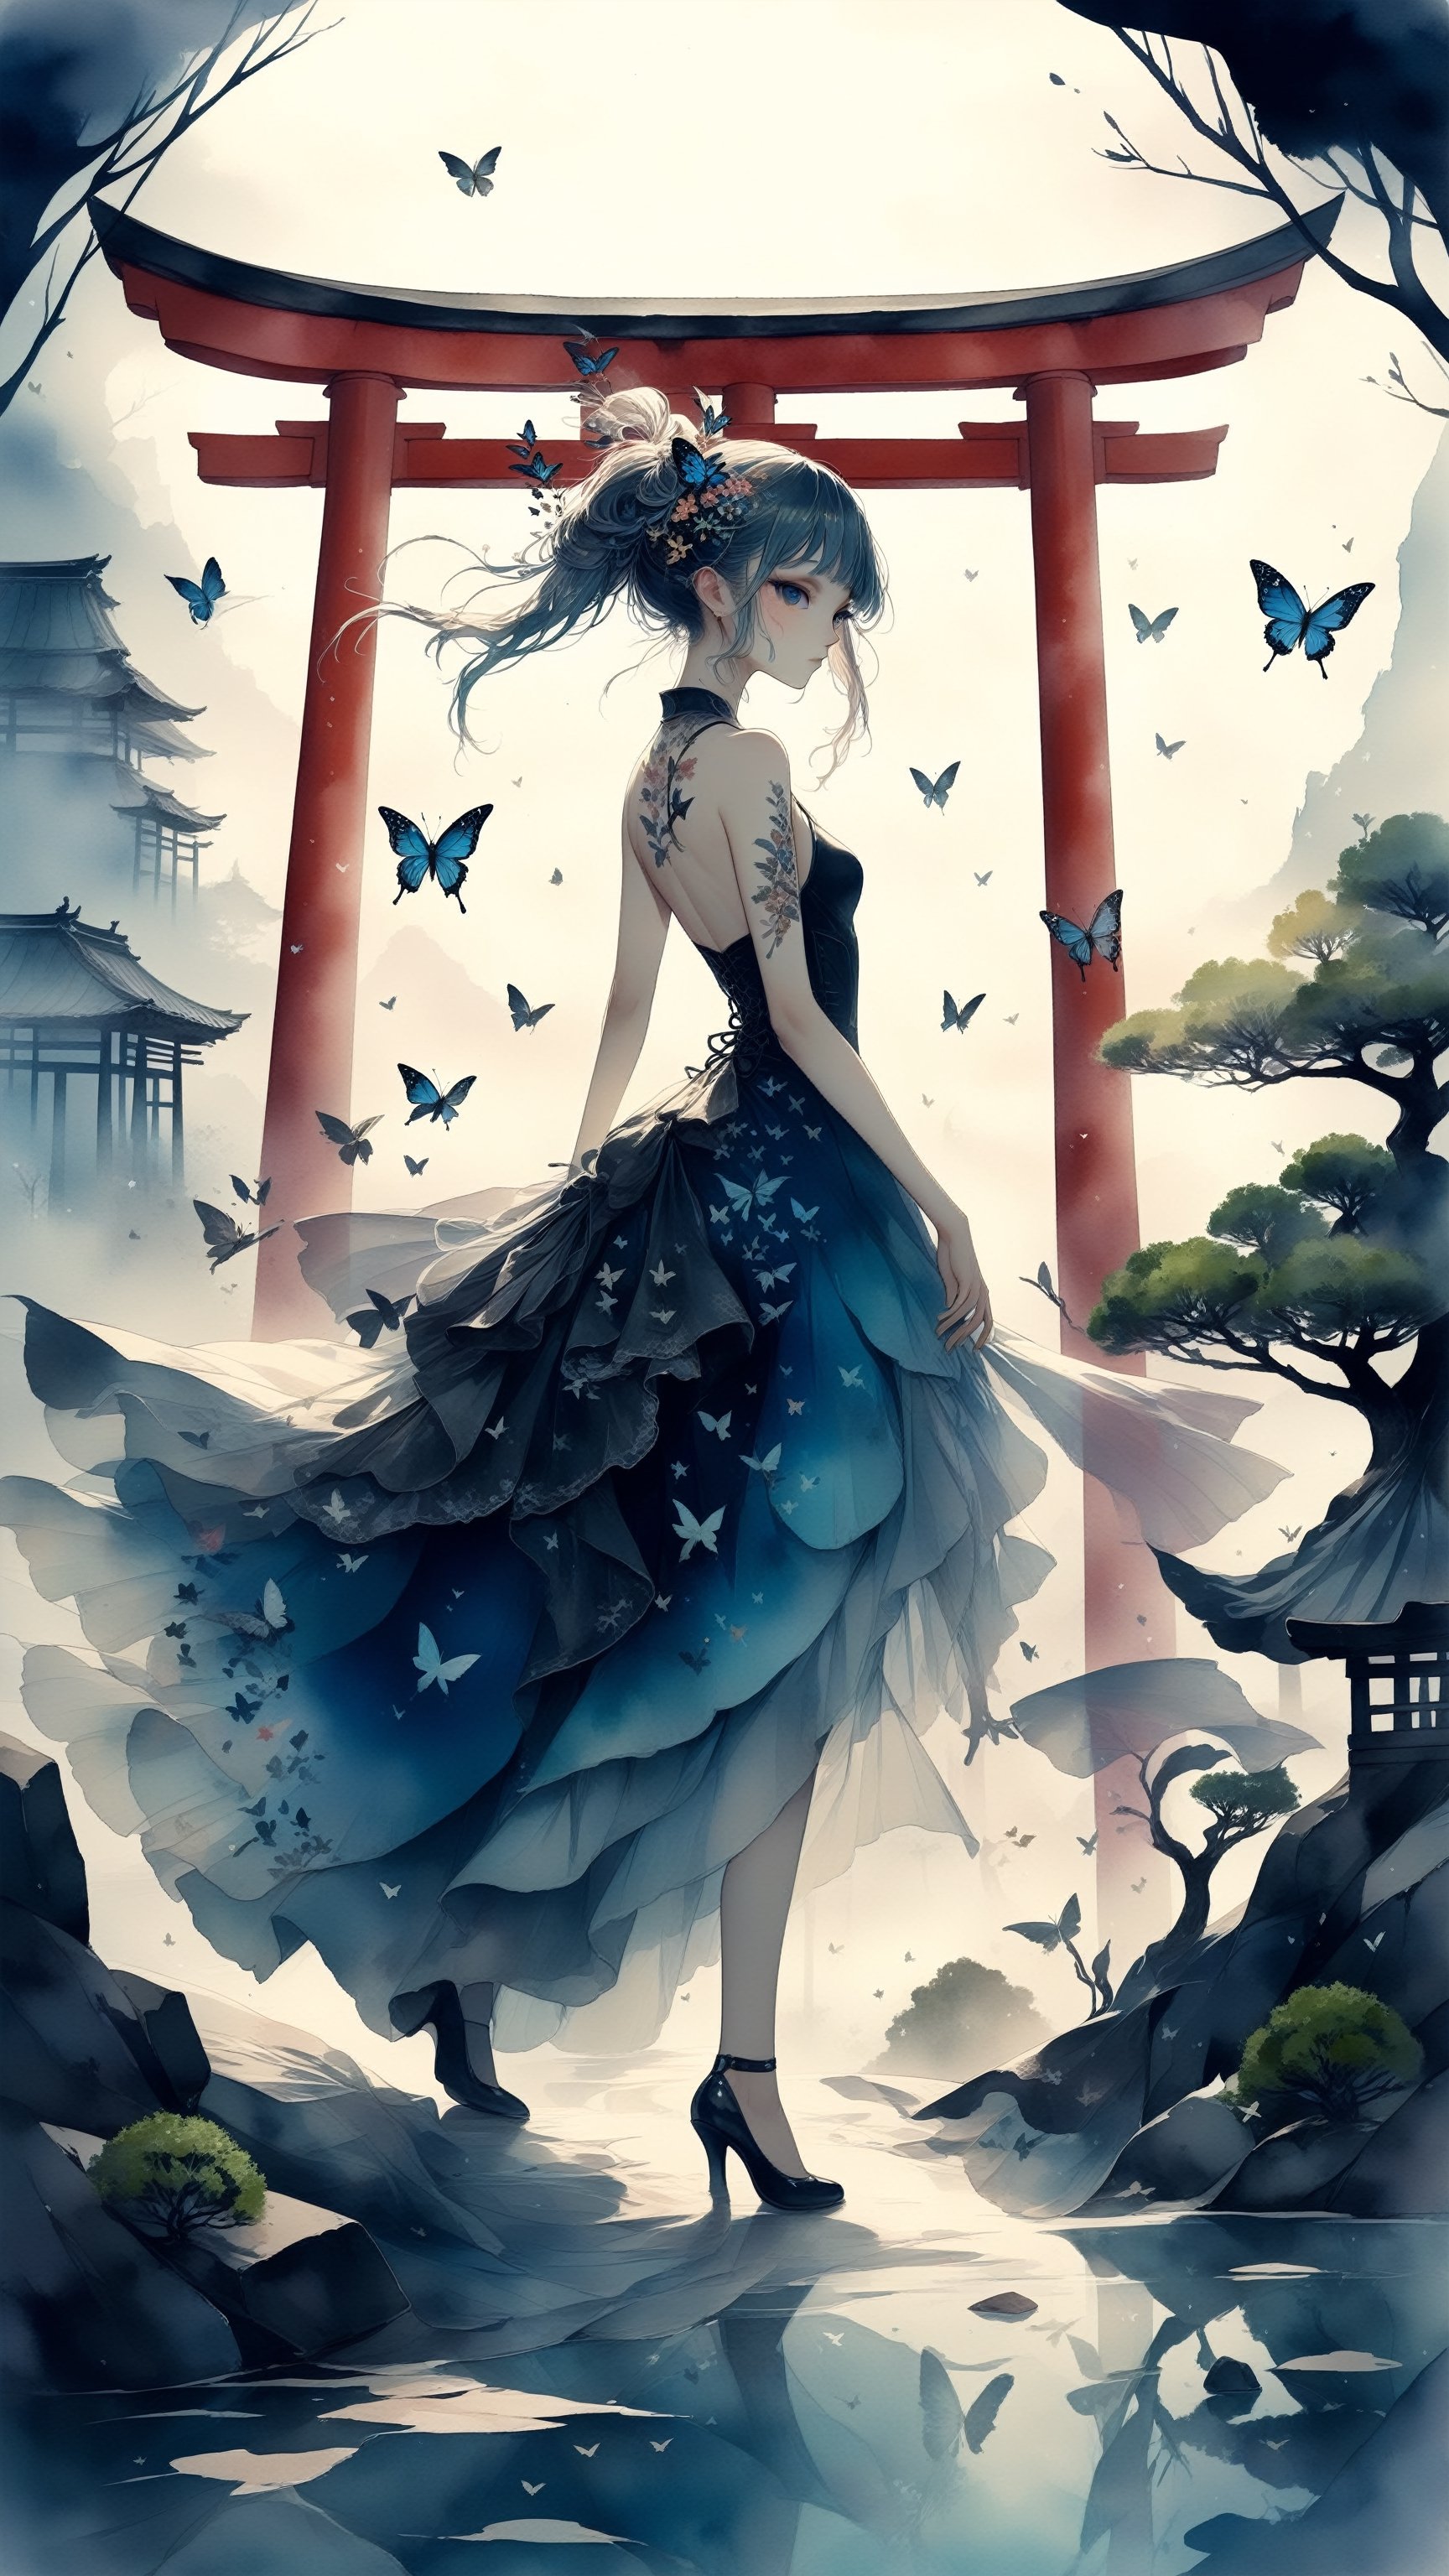 Whimsical, bonsai , japan,Torii ,cute alien_girl, Looking Back , ((Sexy Clothing)), realistic, Walking in a strutting pose, , Butterflies, masterpiece, best quality, aesthetic, Create an image using junk art elements, with repurposed materials, found objects, and a sense of resourcefulness and creativity,Decora_SWstyle,watercolor,Devasted landscape 